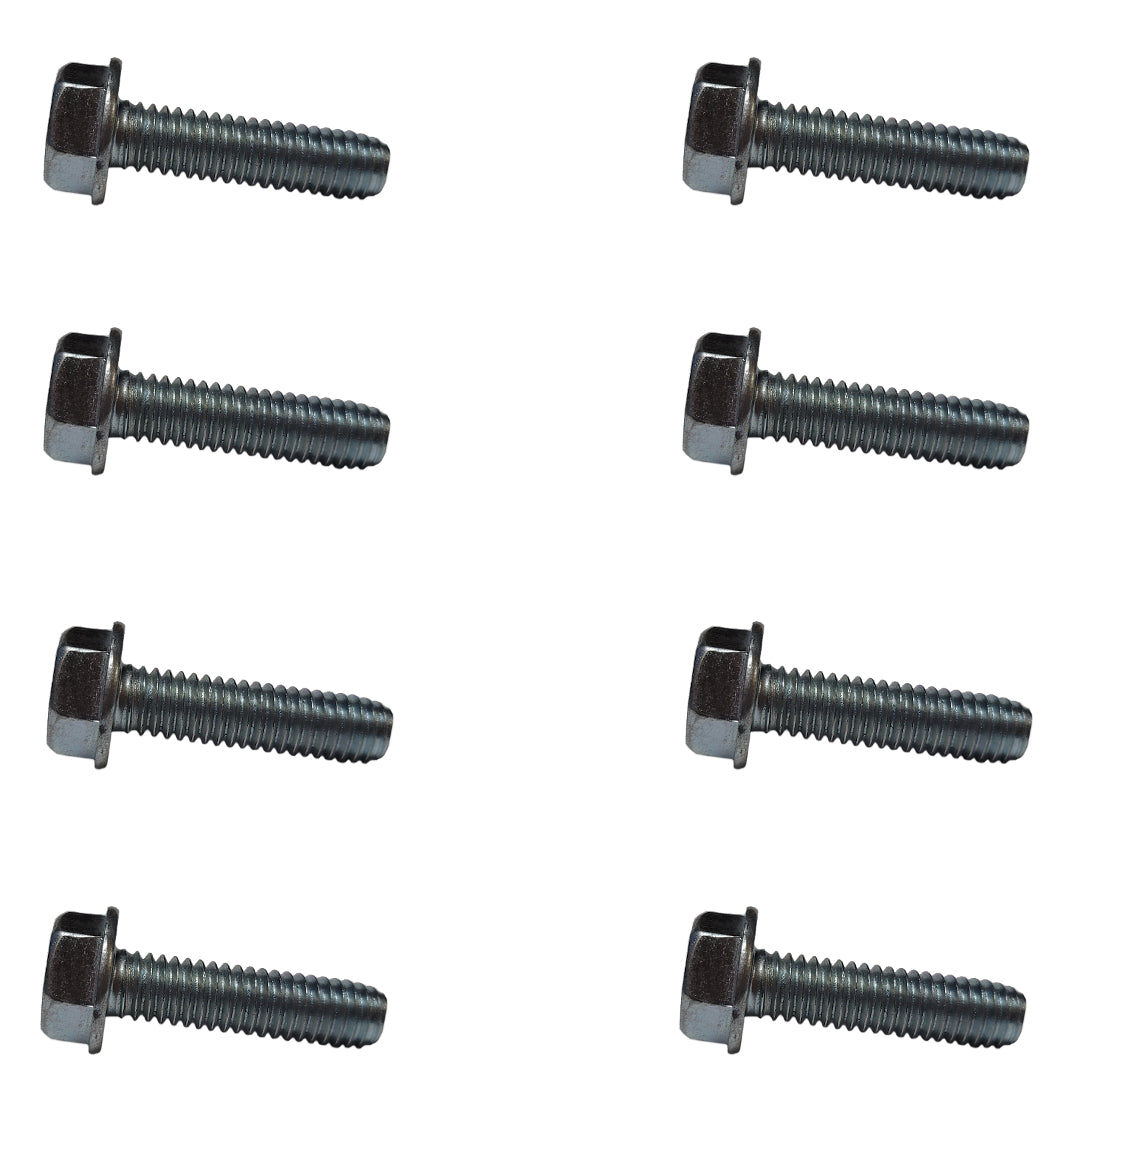 A&I Self-Tapping Mounting Bolt (8 PACK) - B1RS5,8